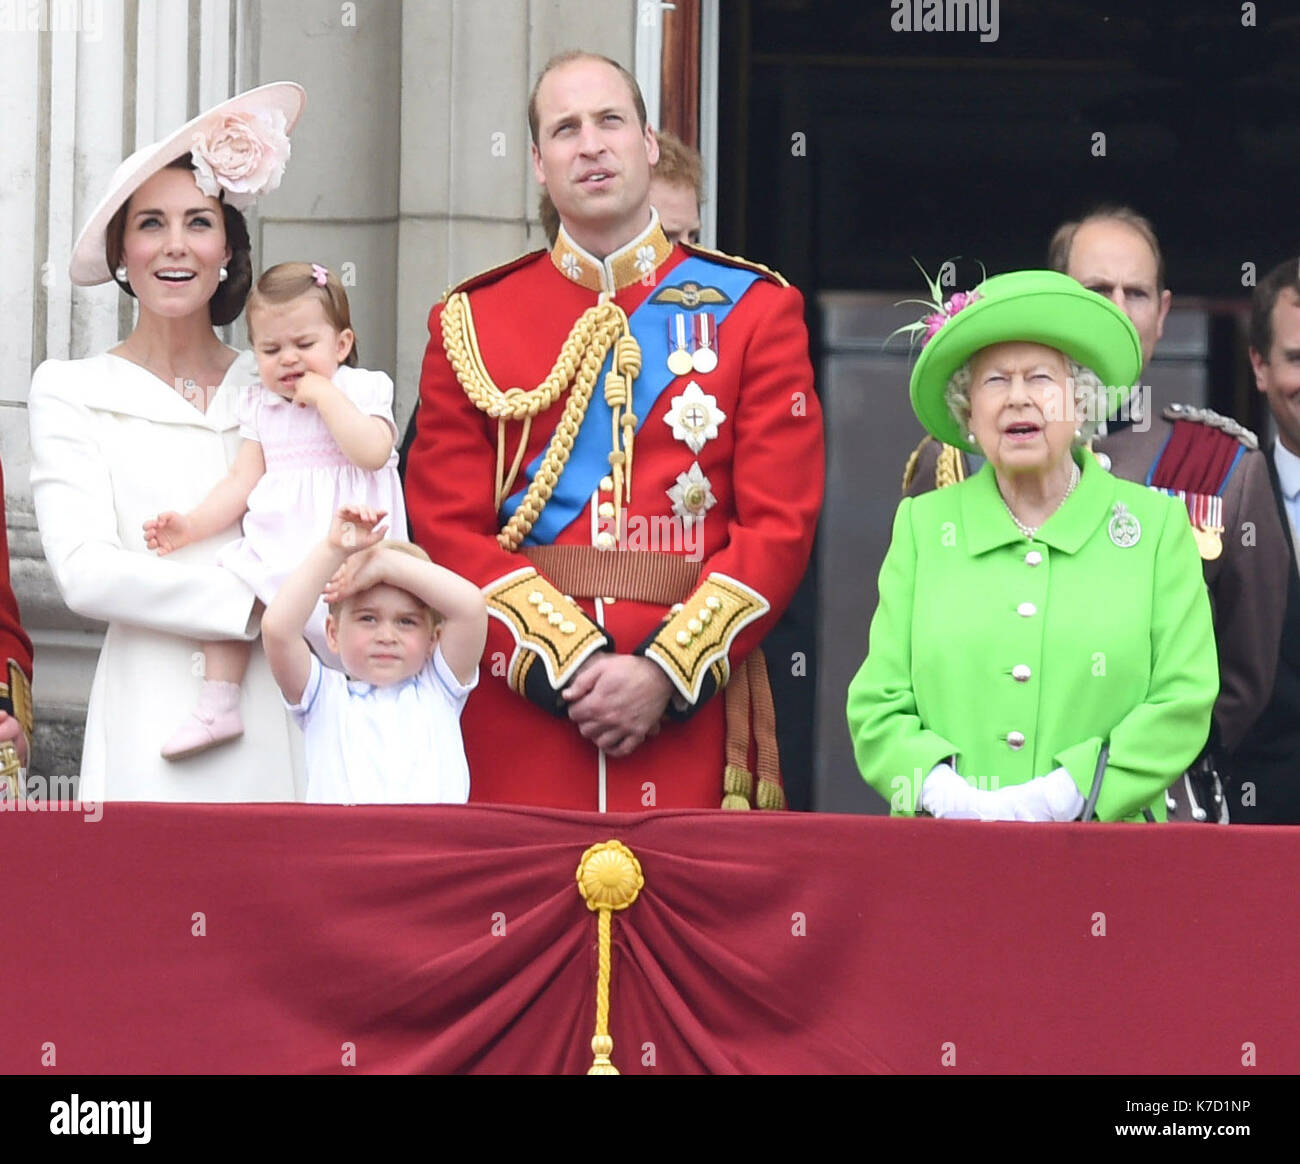 Photo Must Be Credited ©Alpha Press 079965 11/06/2016 Kate Duchess of Cambridge Katherine Catherine Middleton Princess Charlotte and Prince George with Prince William Duke Of Cambridge and Queen Elizabeth II  in London for Trooping the Colour 2016 during The Queen's 90th Birthday Celebrations. Stock Photo